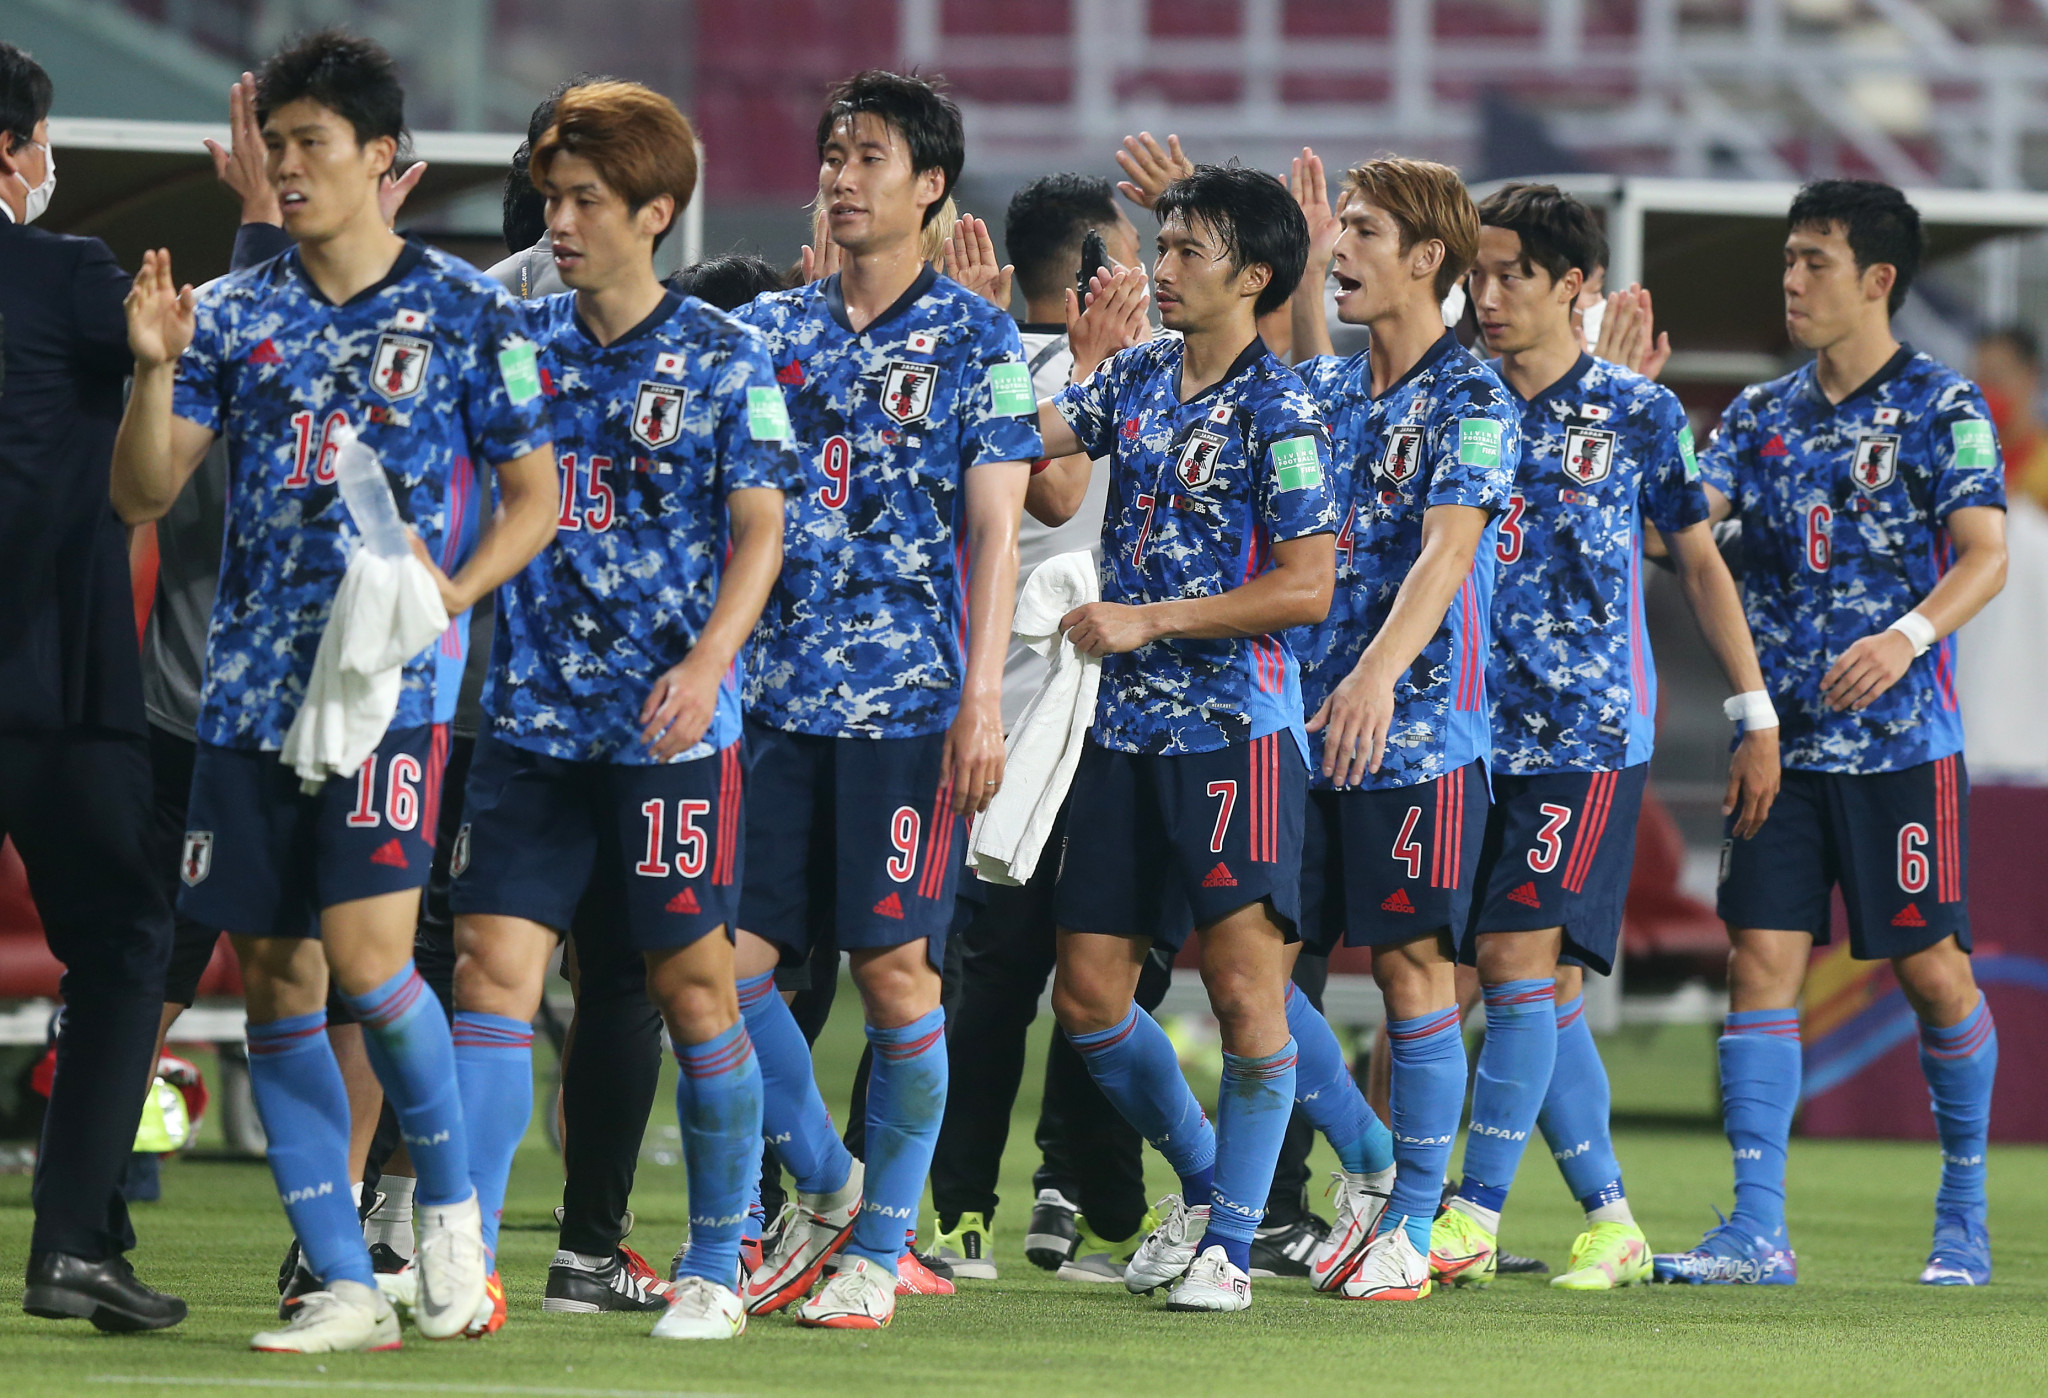 Japan replaces China as host of East Asian Football Championships due to coronavirus pandemic